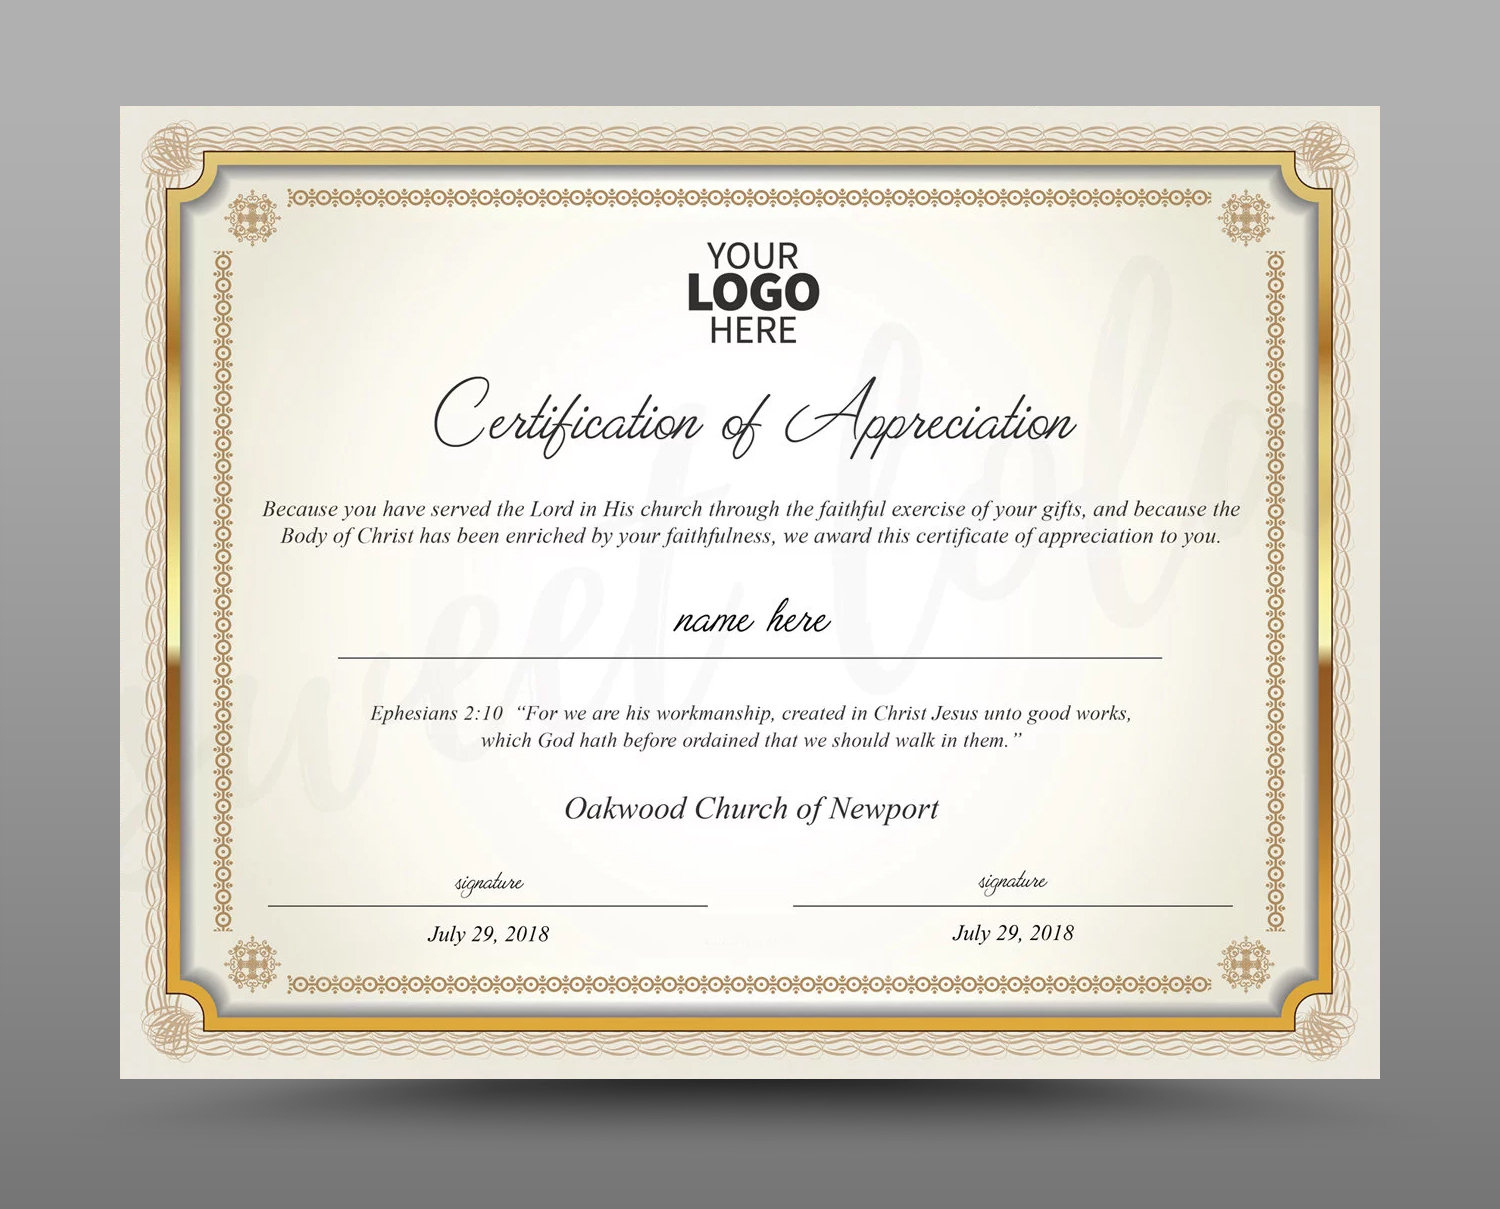 Certificate Template, Instant Download Certificate Of Appreciation –  Editable Ms Word Doc And Photoshop File Included For Walking Certificate Templates